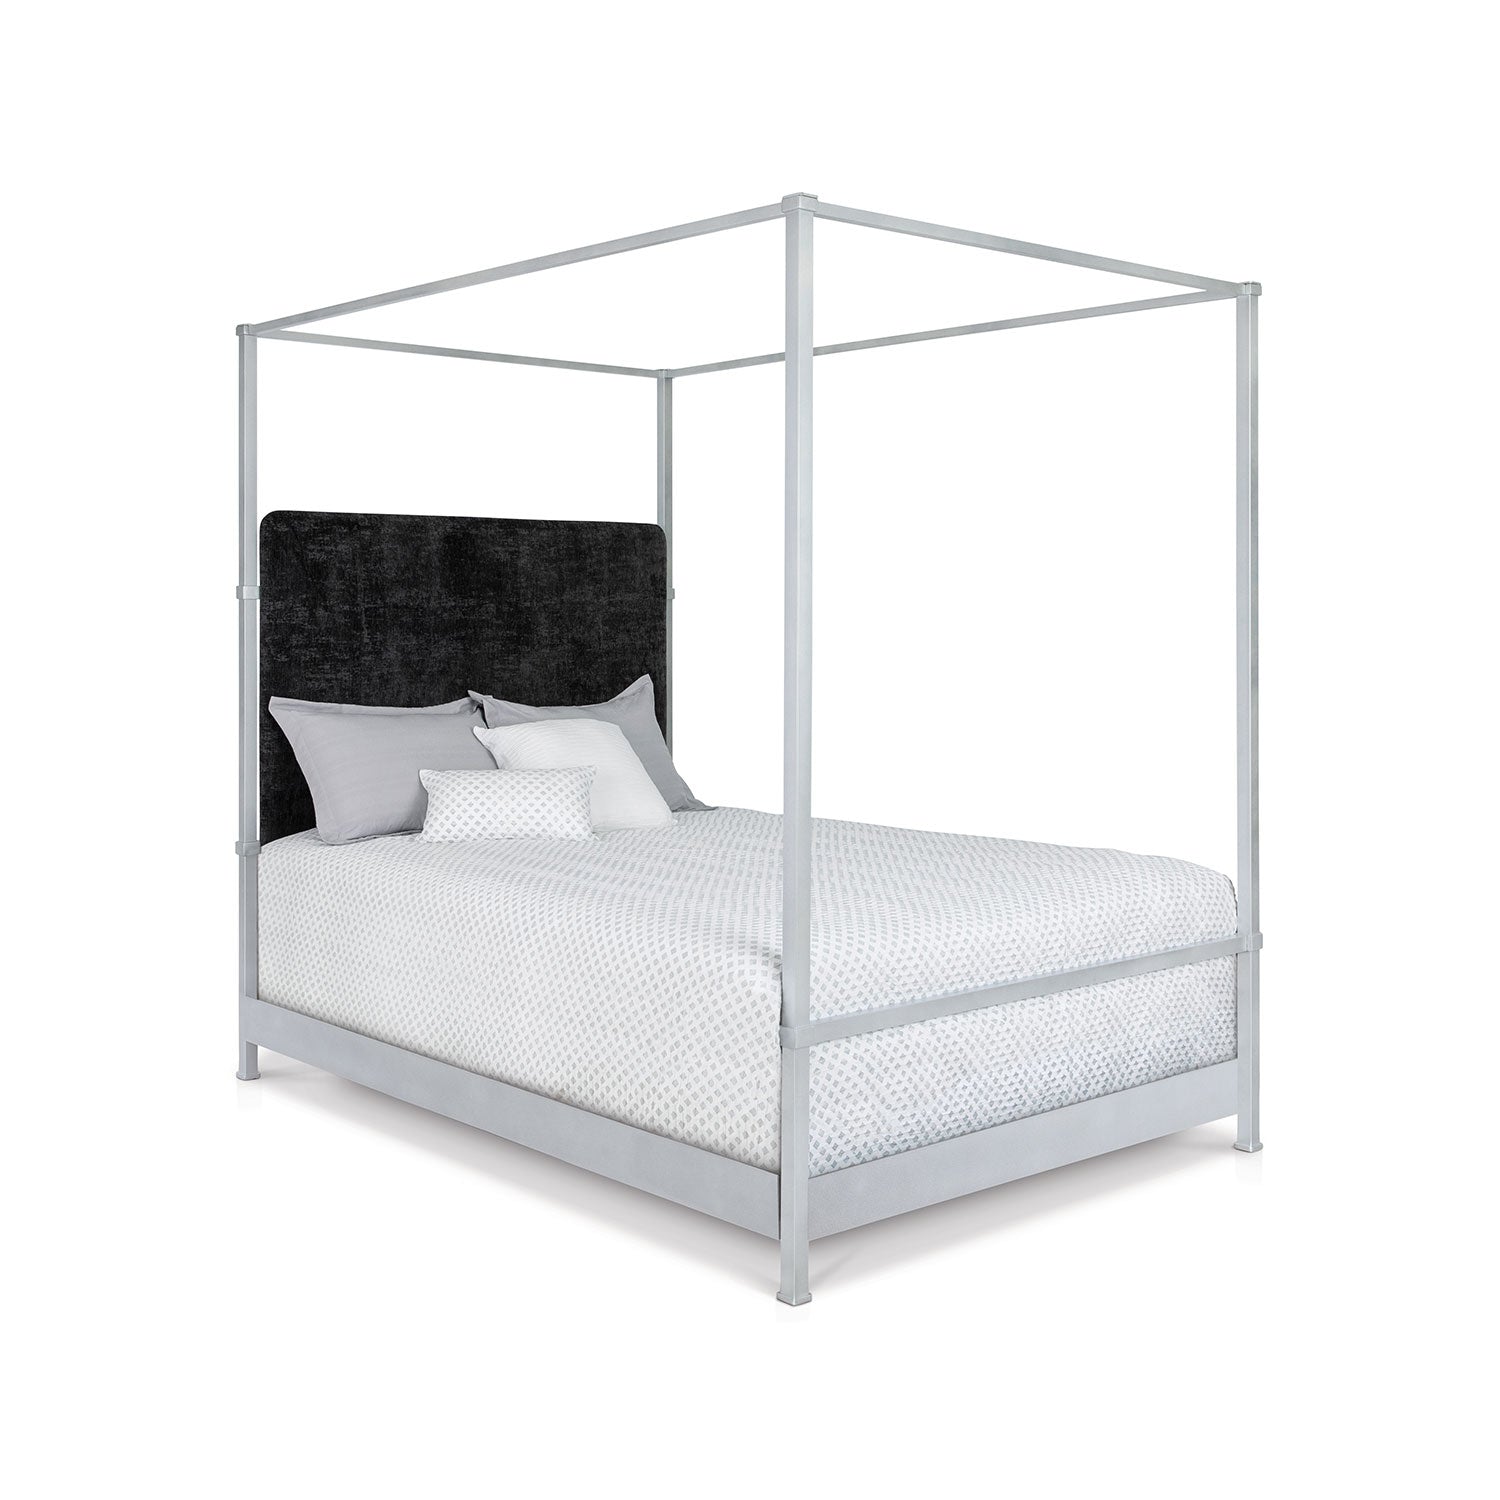 Quincy Canopy Bed